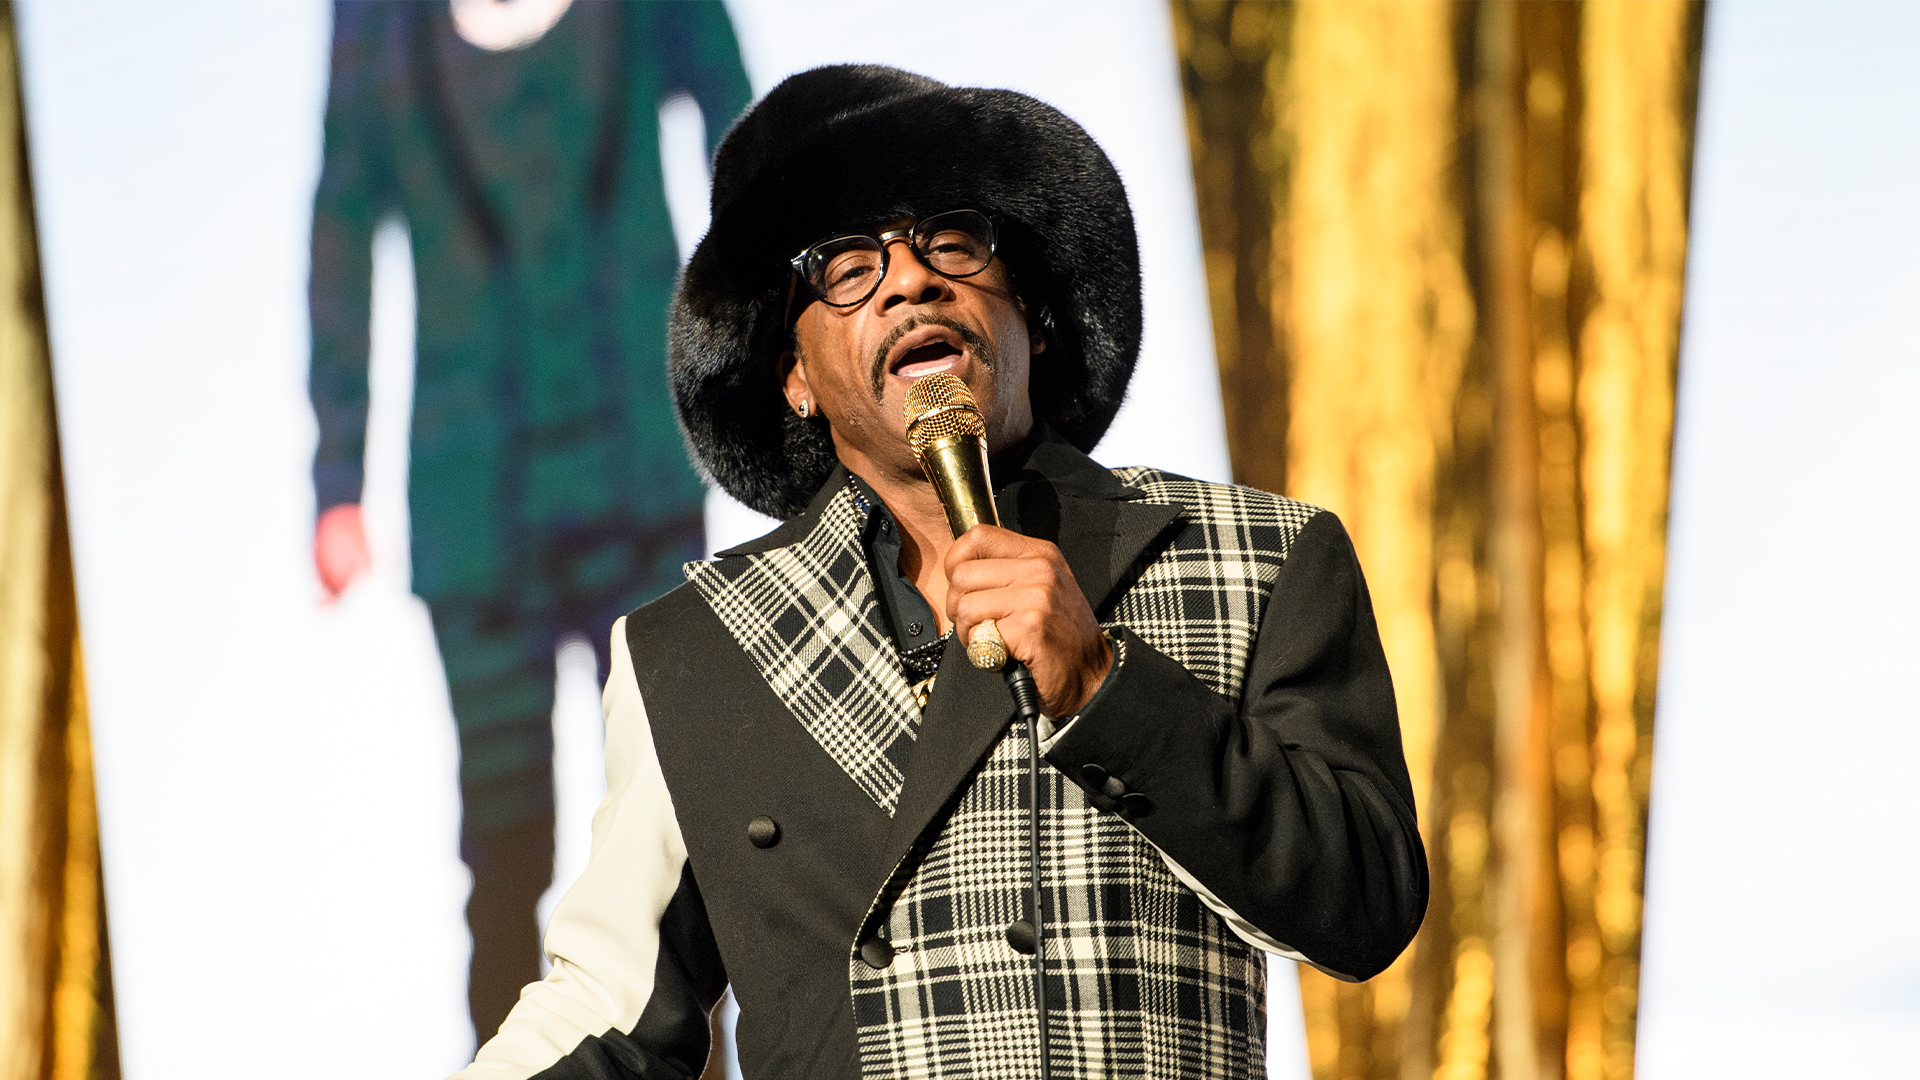 Katt Williams Reflects On The Lengths He's Gone To Protect His Integrity — 'I've Had To Turn Down $50 Million Four Times'